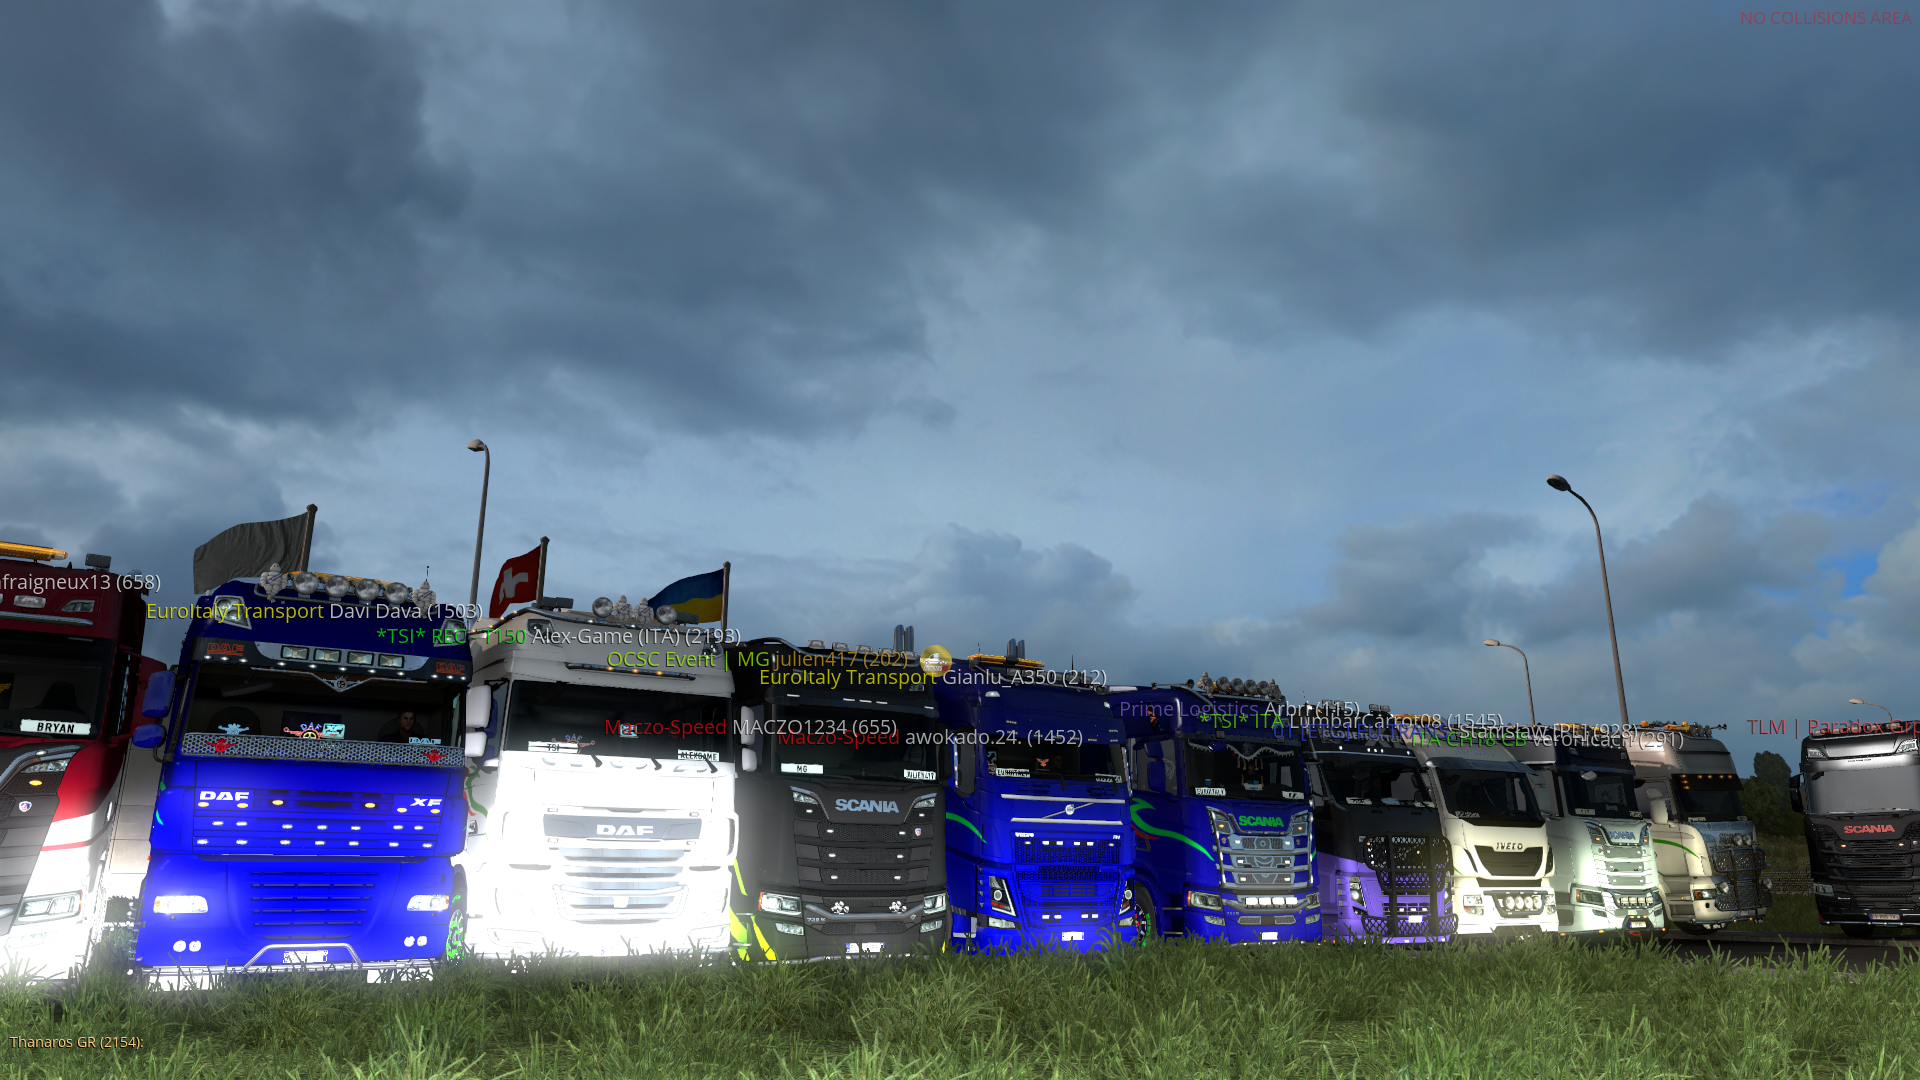 ets2_20210111_232004_00.png